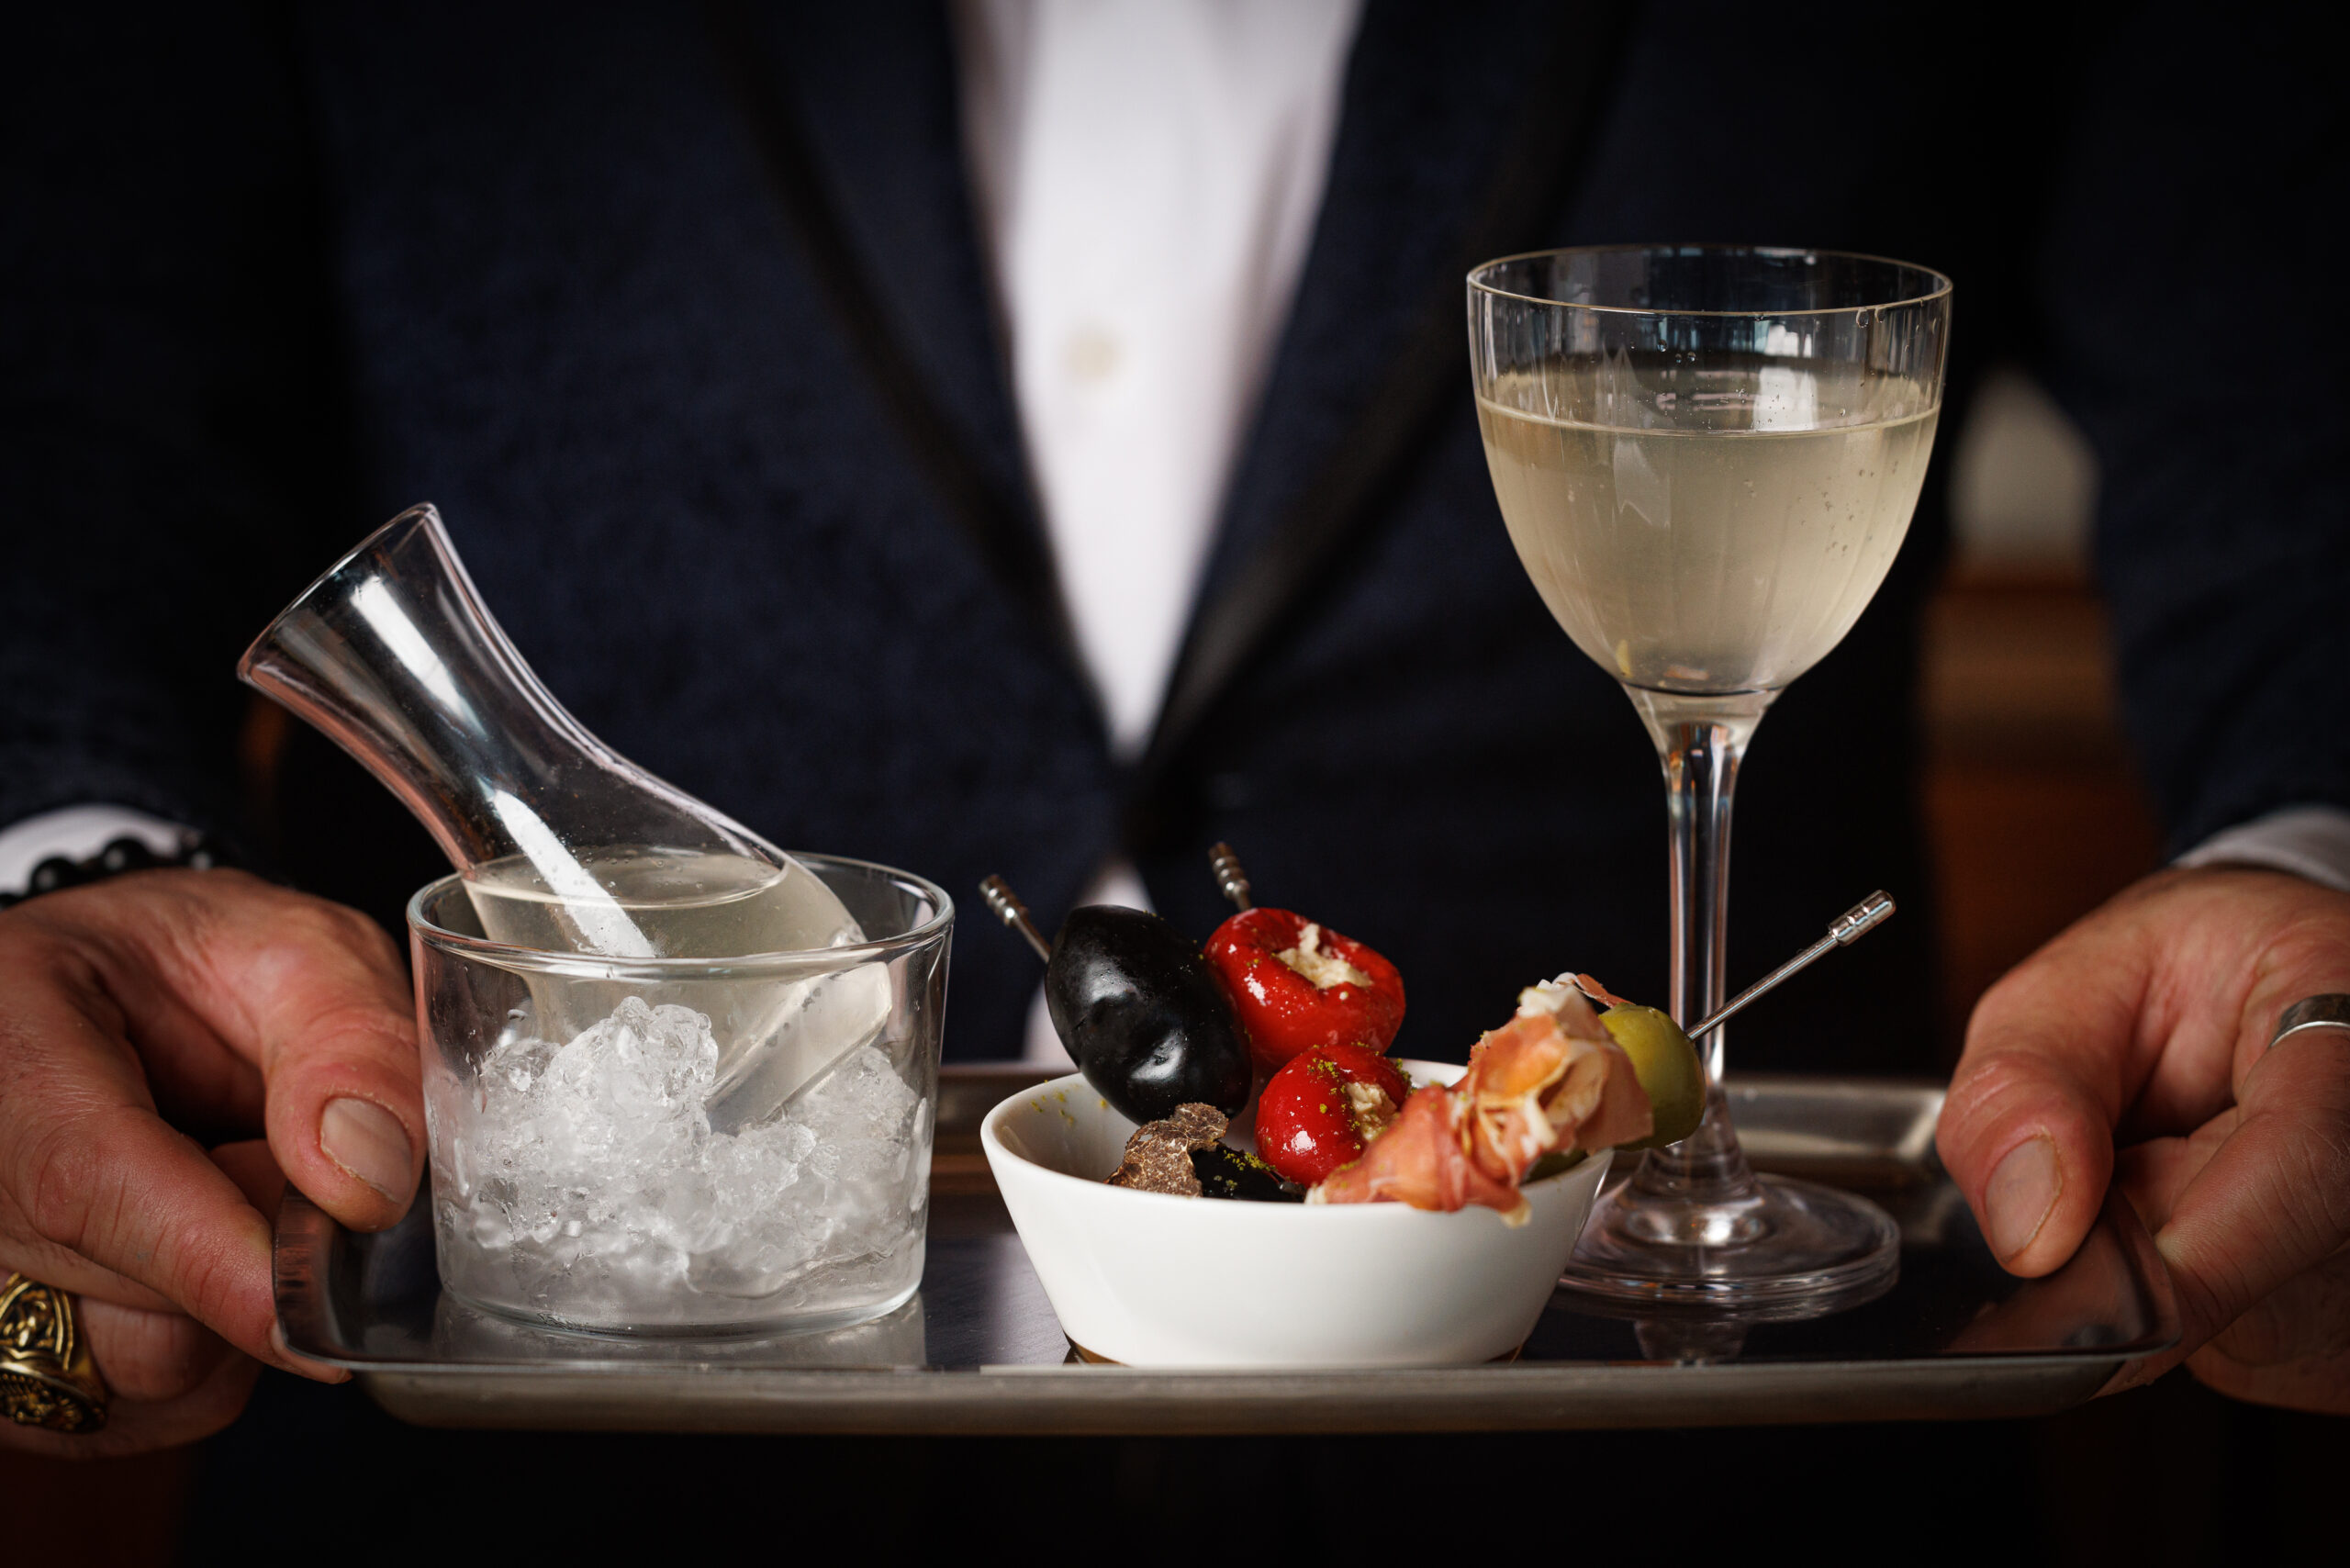 These over-the-top martinis—and other opulent cocktails—cost $30 (or more)